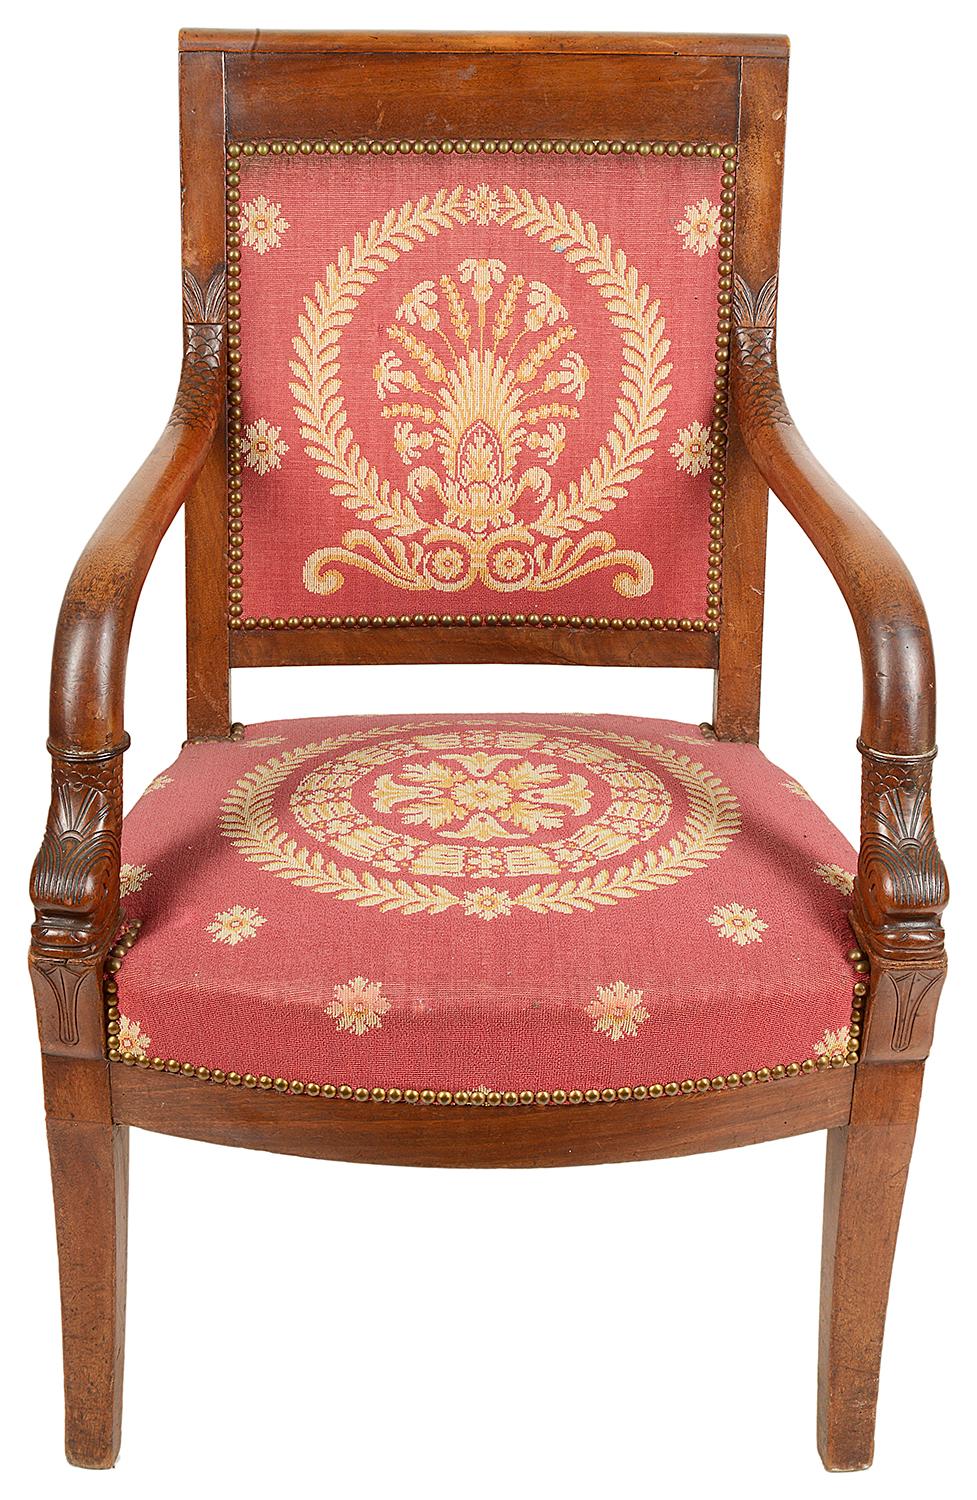 A good quality near pair of French Mahogany Empire influenced armchairs. Each being upholstered in a classical damask patterned burgundy fabric, polished back rail, Dolphins carved to the base of each arm, raised on elegant out swept legs.